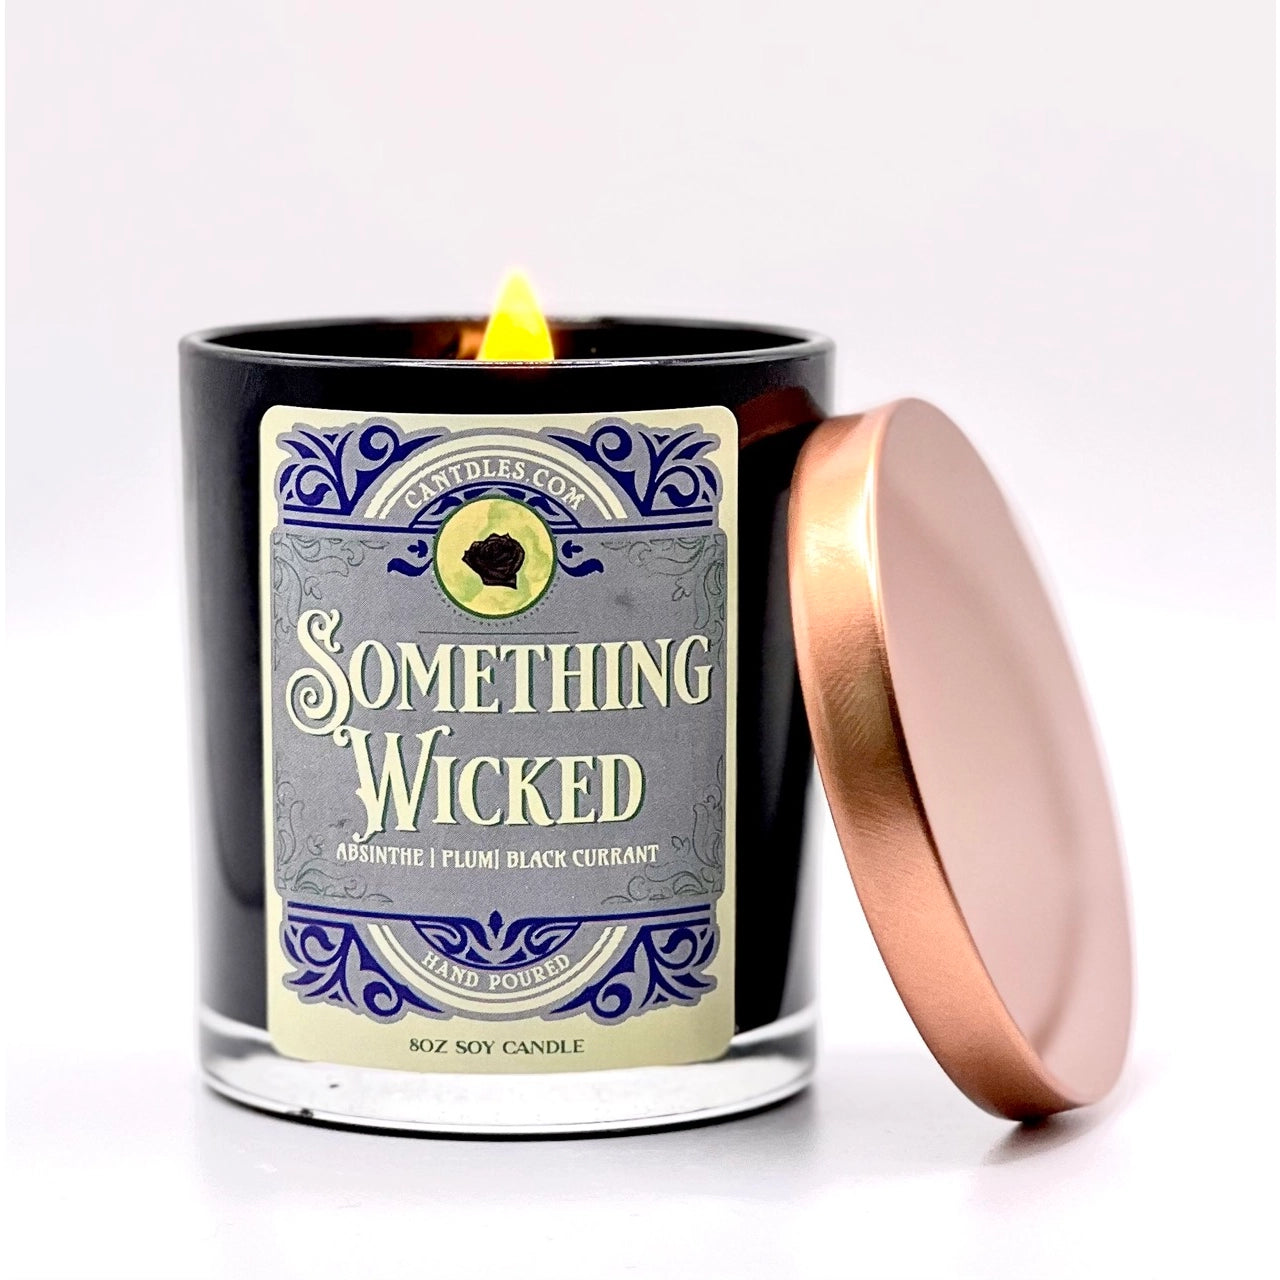 Wooden Wicks for Candles | Northwood Candle Supply Medium / 100